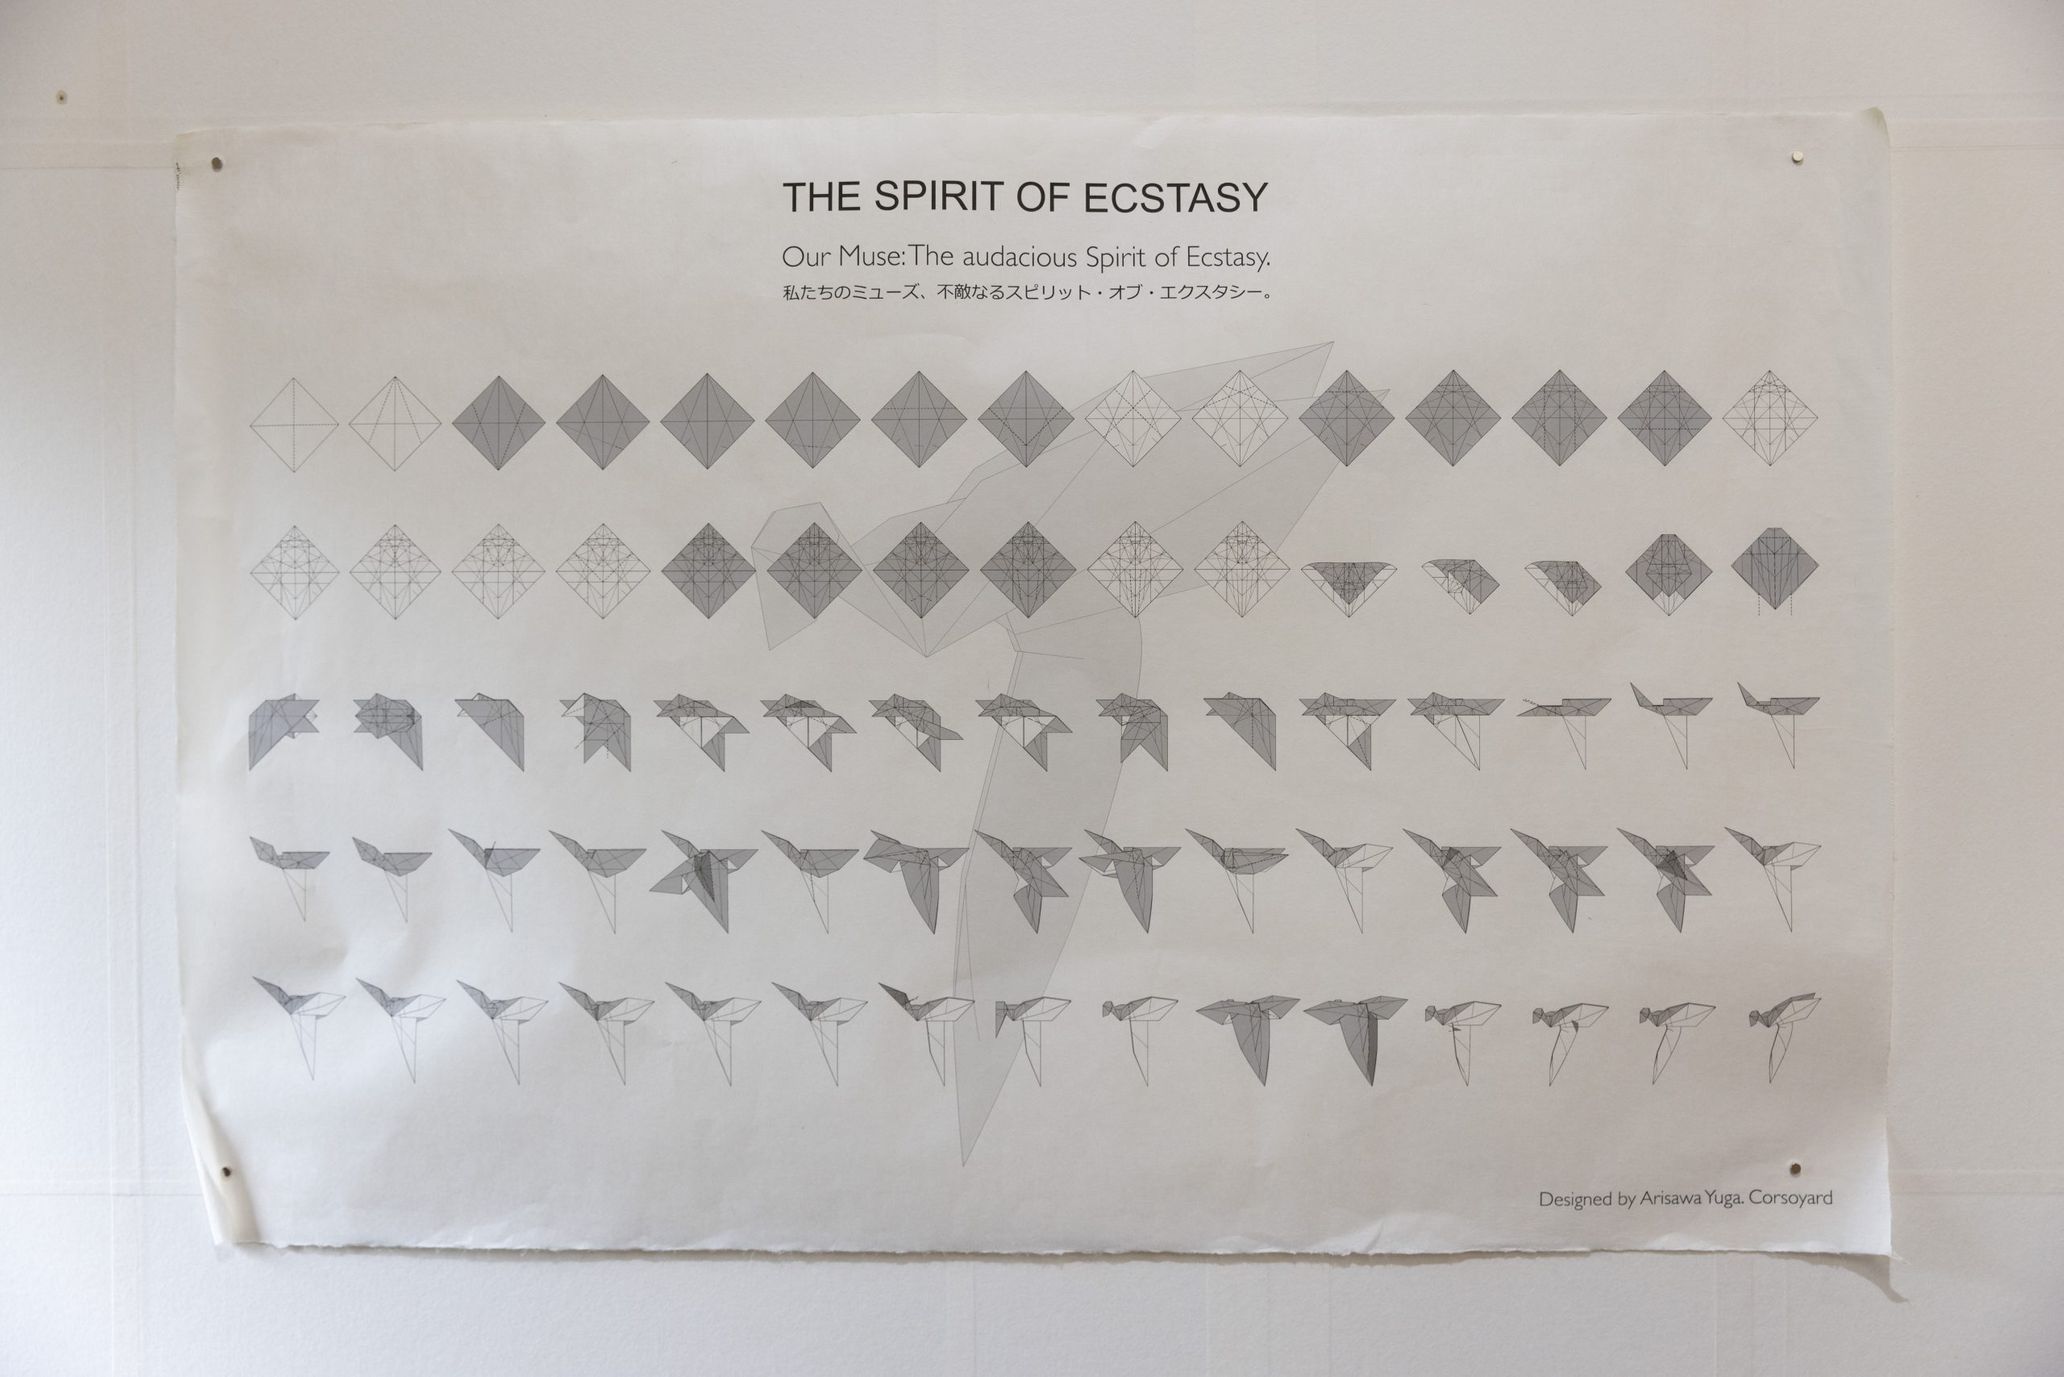 The Rolls-Royce Spirit was reproduced with origami, and the folded diagram was made into a poster. One of the trial prints was displayed in his office.